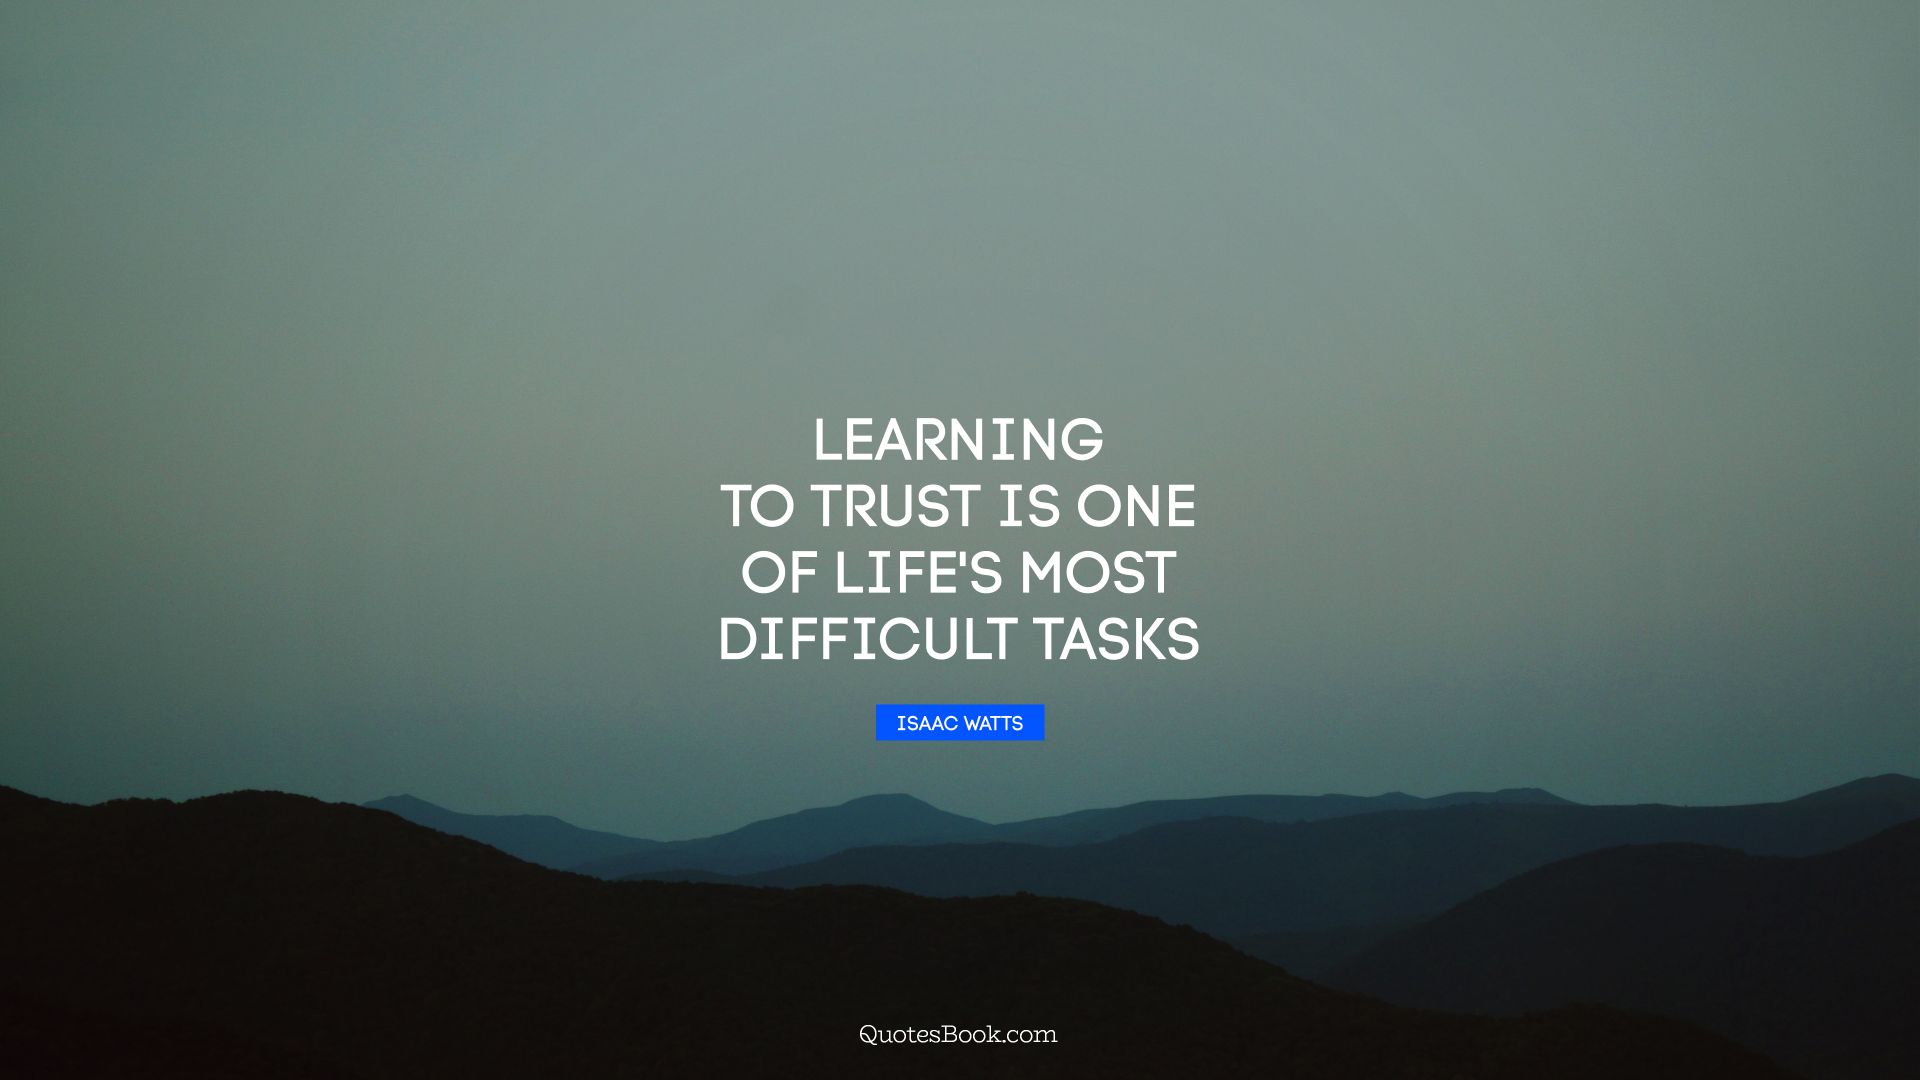 Learning to trust is one of life's most difficult tasks. - Quote by Isaac Watts